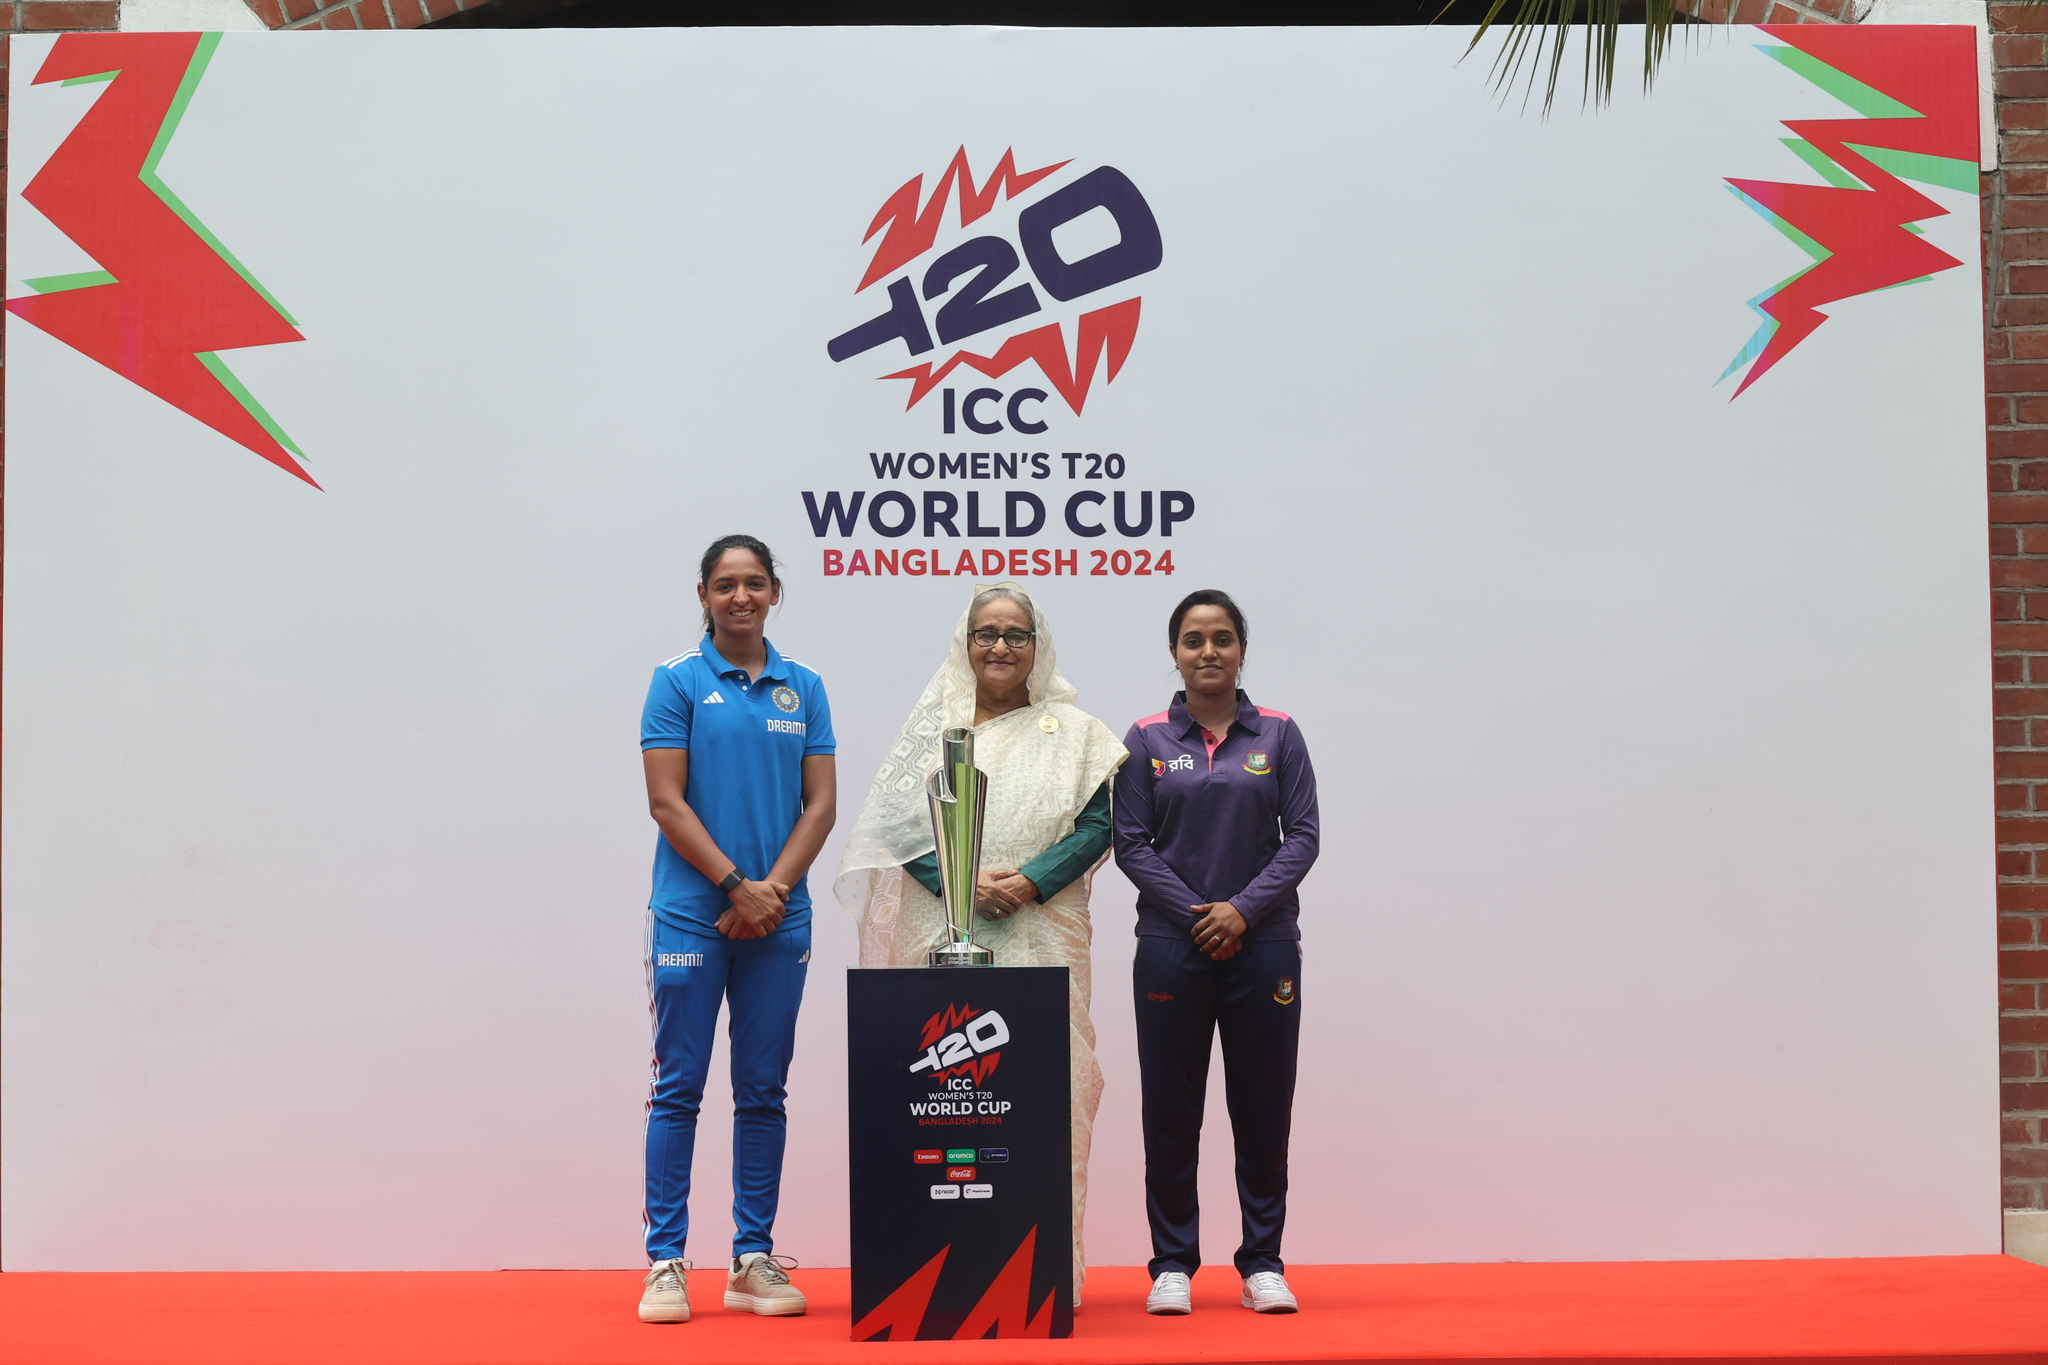 ICC announce schedule of Women's T20 World Cup 2024